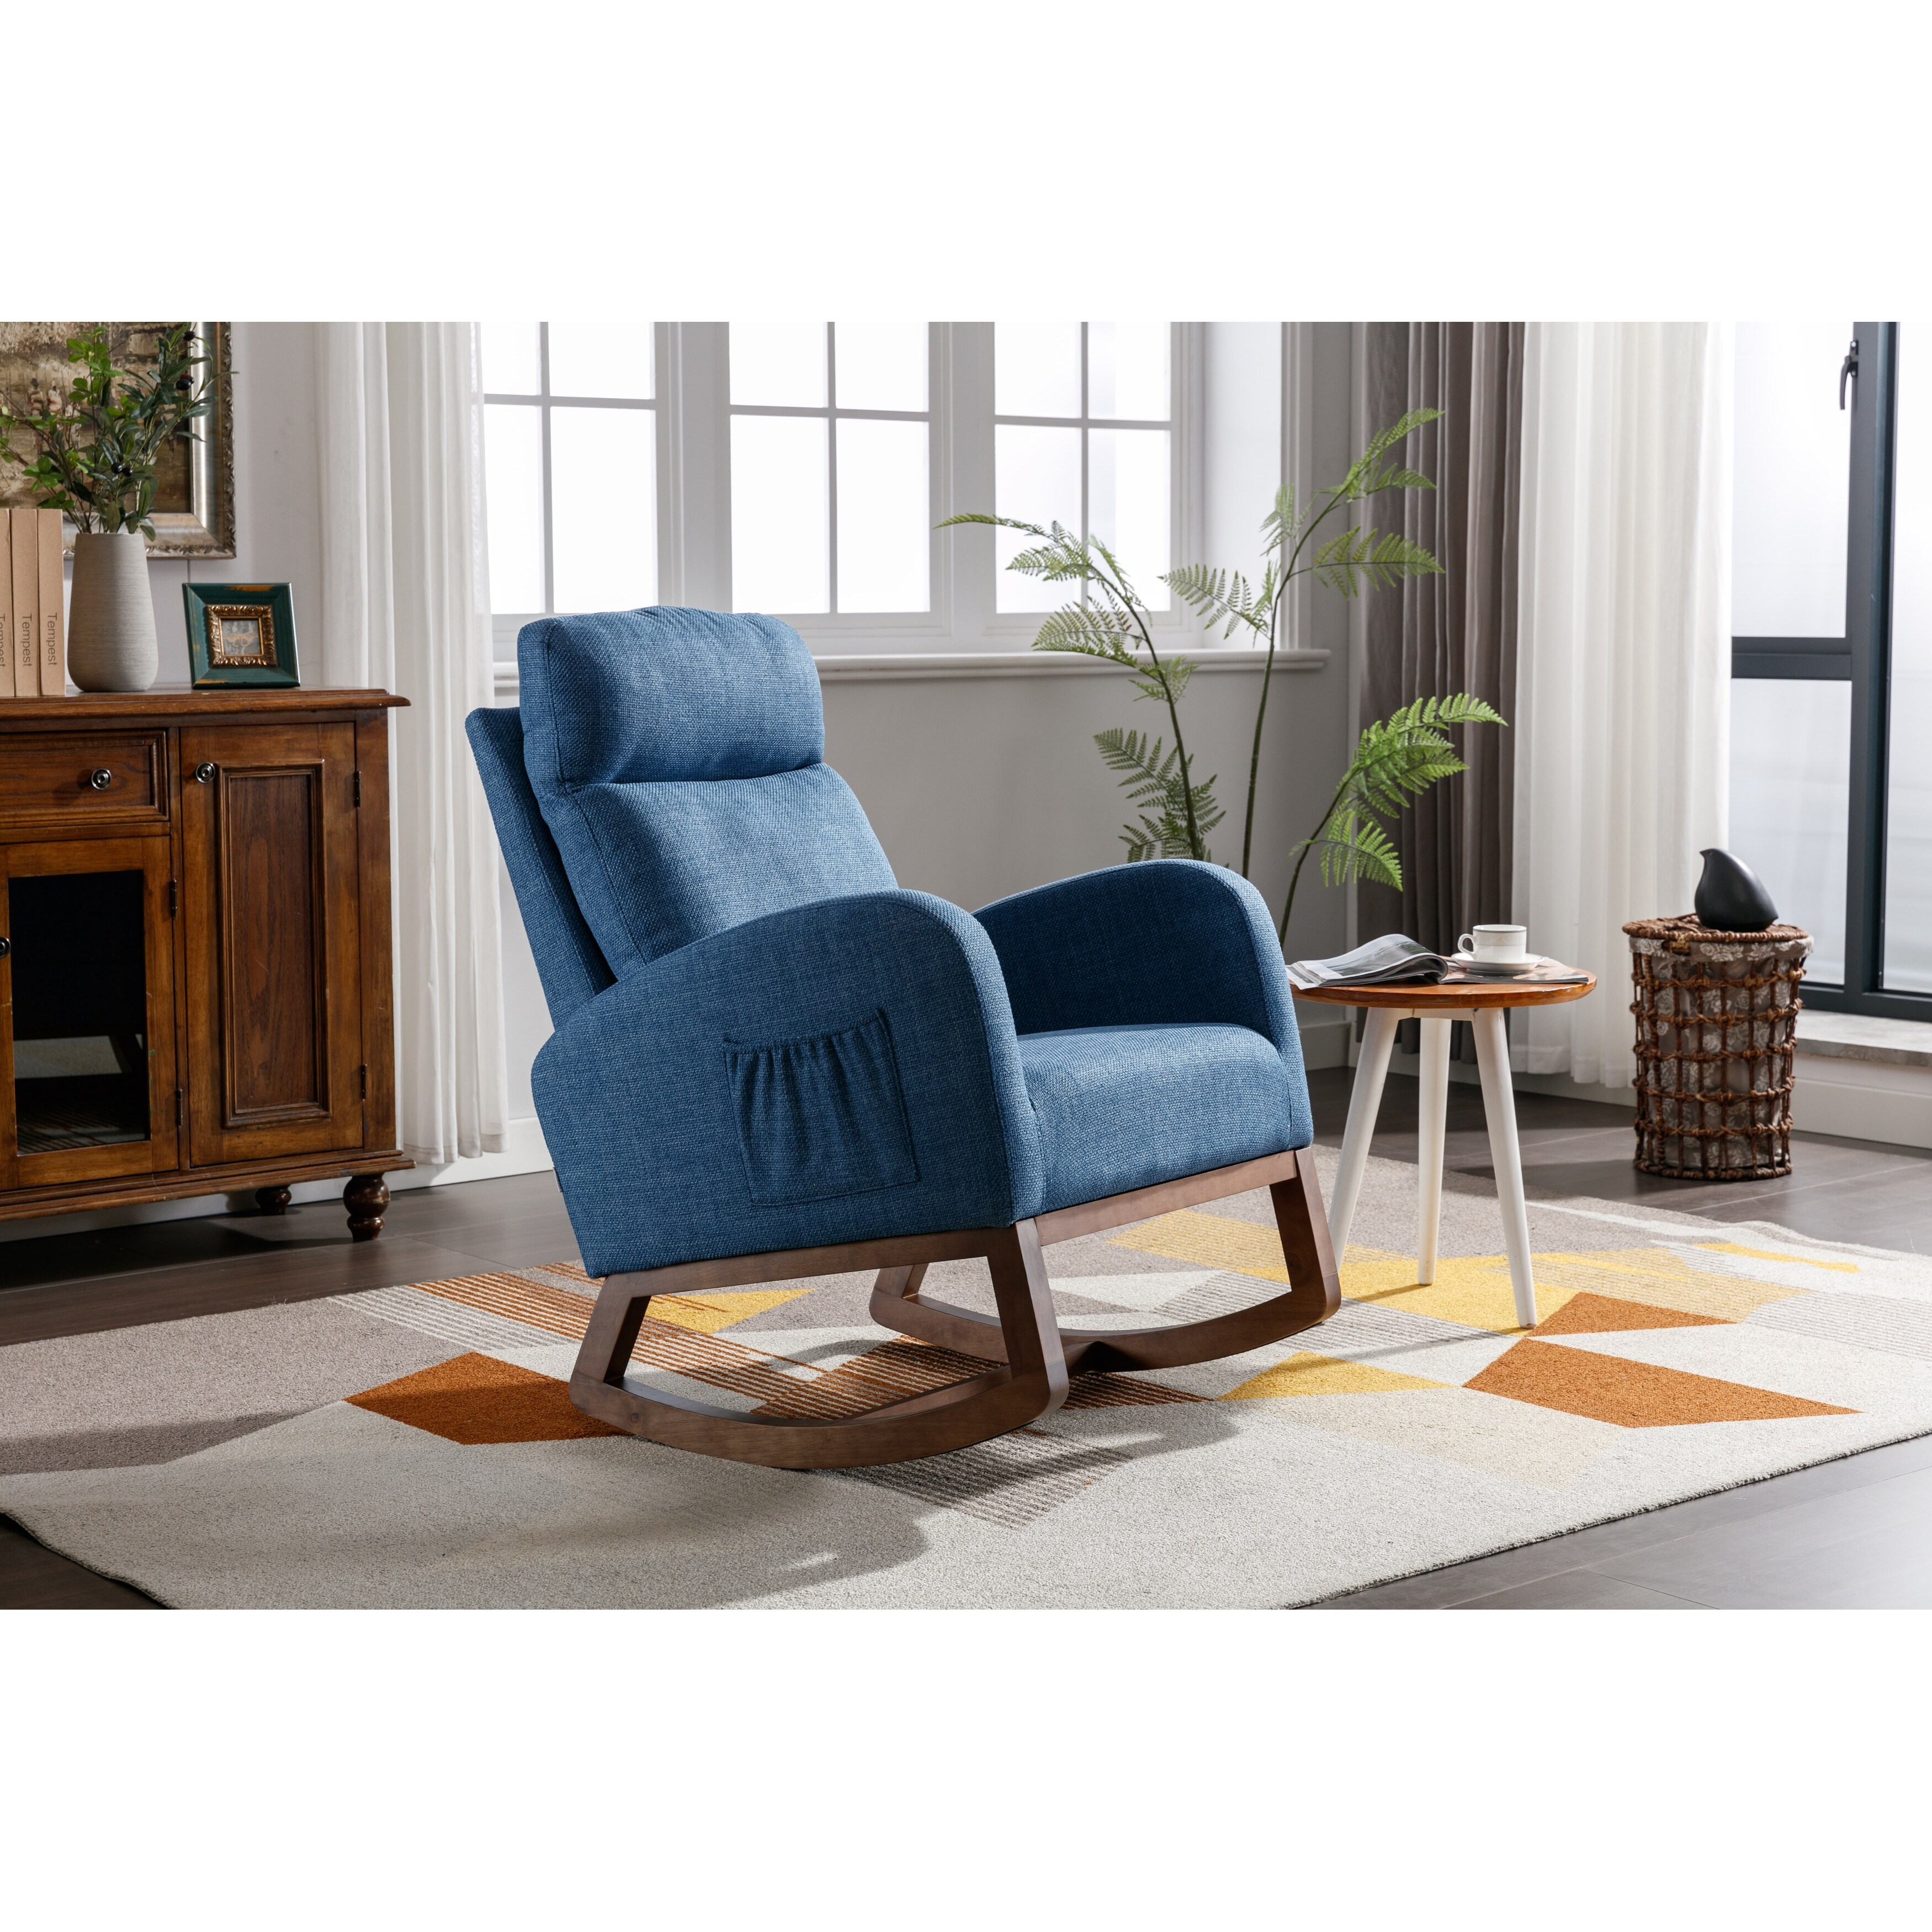 Comfortable Upholstered Rocking Chair with High Back & Cozy Armrest